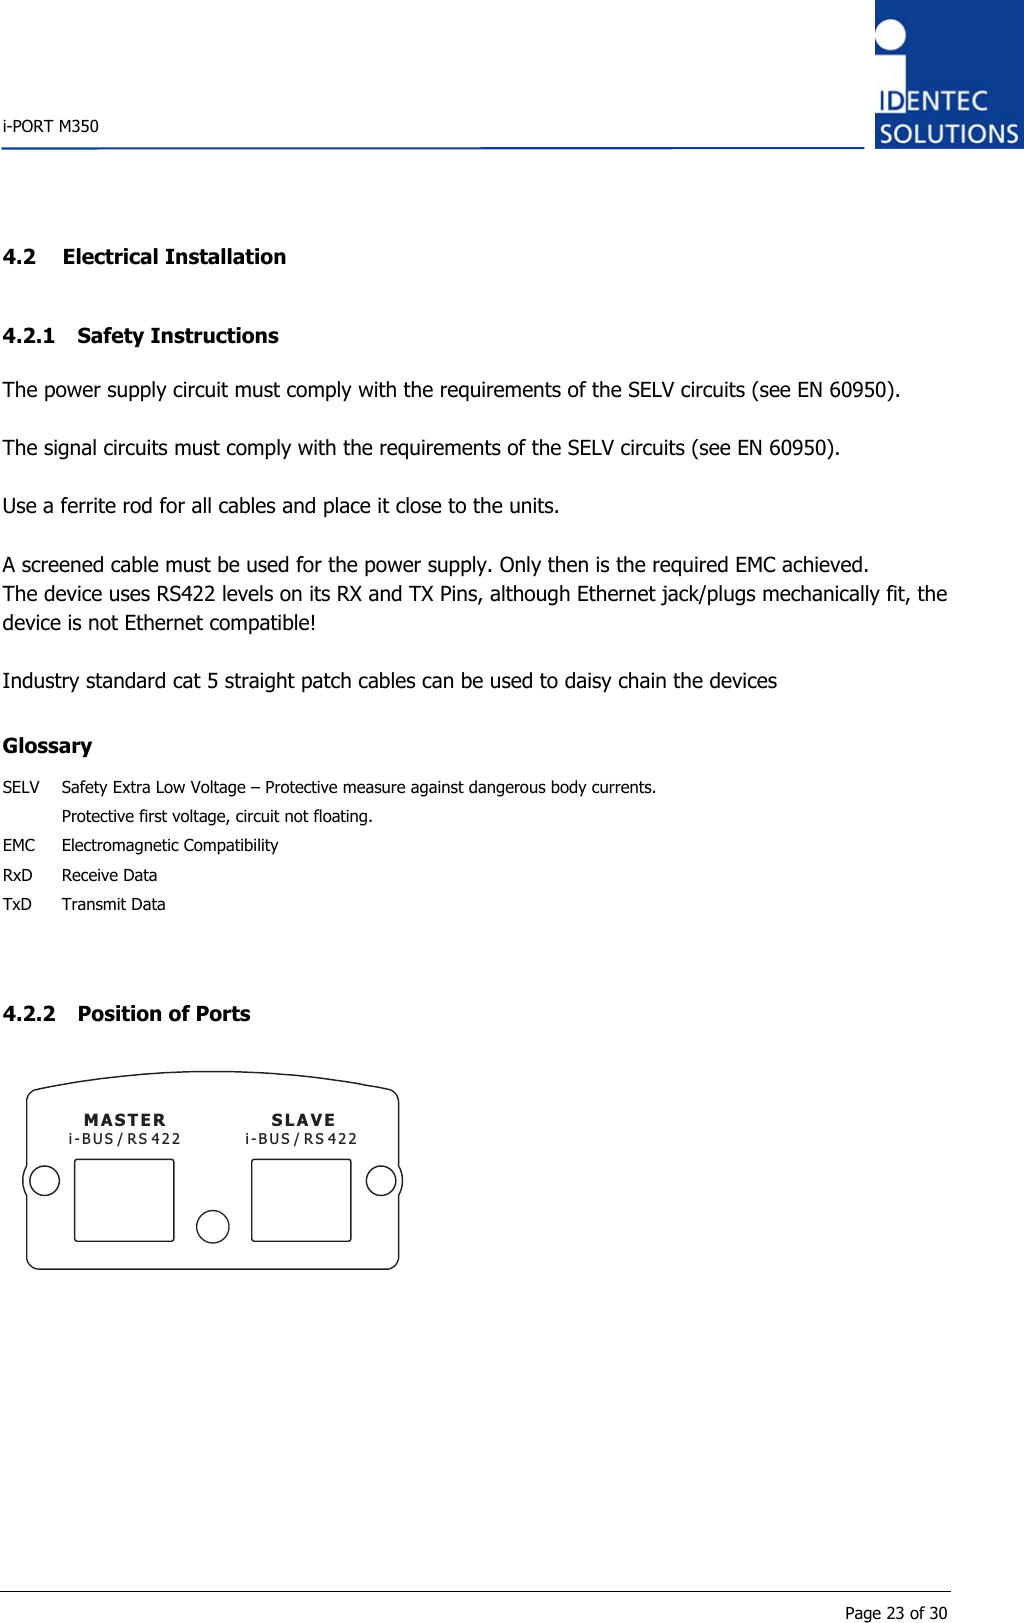    i-PORT M350       Page 23 of 30 4.2 Electrical Installation 4.2.1 Safety Instructions The power supply circuit must comply with the requirements of the SELV circuits (see EN 60950).  The signal circuits must comply with the requirements of the SELV circuits (see EN 60950).  Use a ferrite rod for all cables and place it close to the units.  A screened cable must be used for the power supply. Only then is the required EMC achieved. The device uses RS422 levels on its RX and TX Pins, although Ethernet jack/plugs mechanically fit, the device is not Ethernet compatible!  Industry standard cat 5 straight patch cables can be used to daisy chain the devices  Glossary SELV  Safety Extra Low Voltage – Protective measure against dangerous body currents.    Protective first voltage, circuit not floating. EMC Electromagnetic Compatibility RxD Receive Data TxD Transmit Data   4.2.2 Position of Ports MASTER SLAVEi-BUS/RS422 i-BUS/RS422         